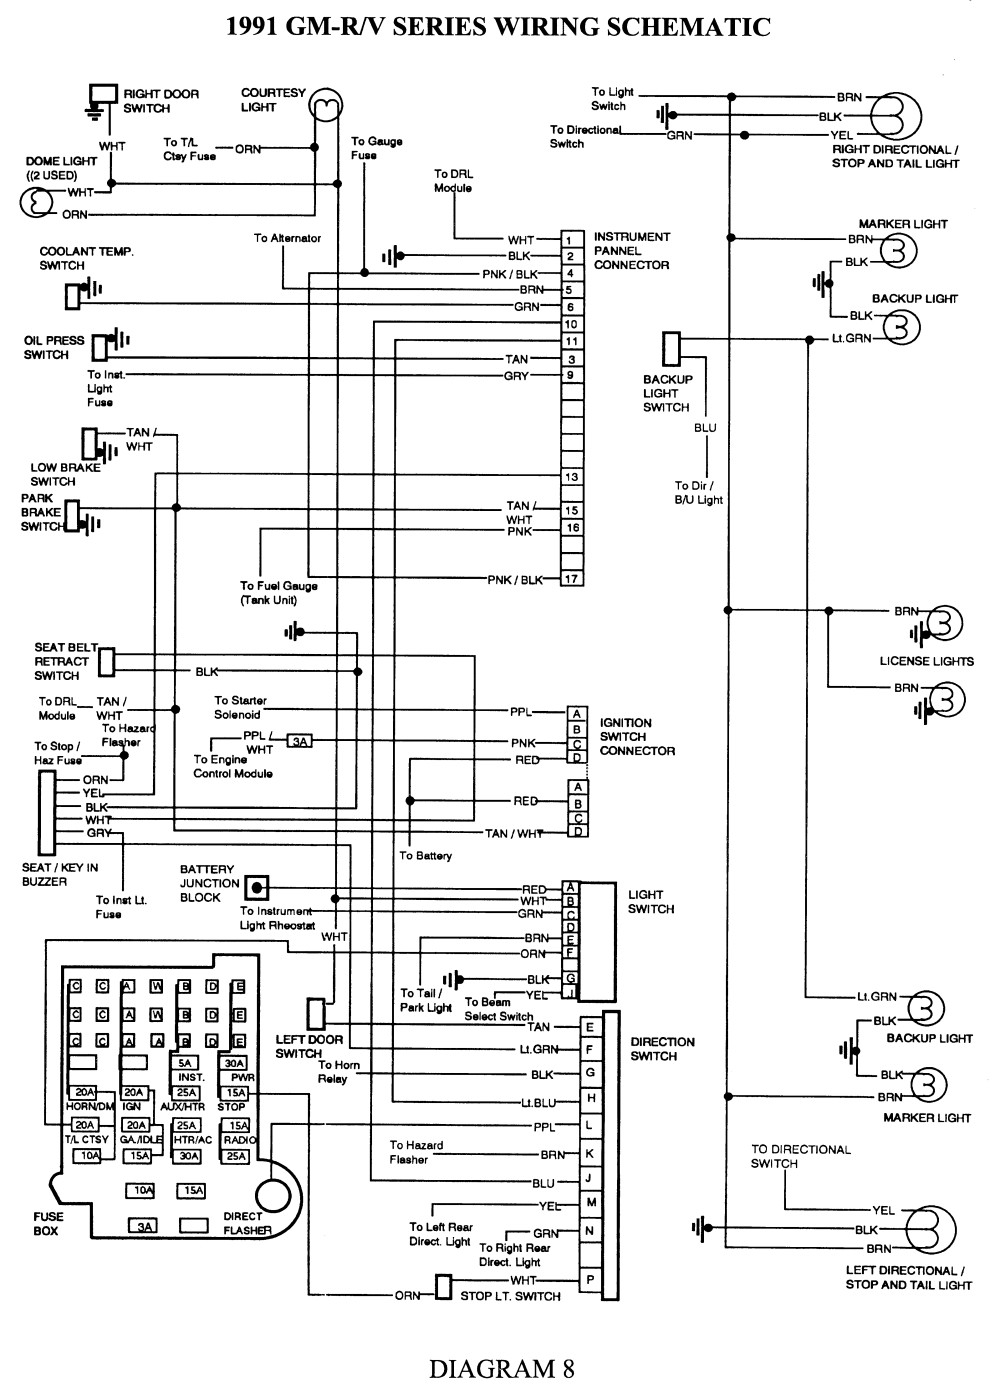 1991 Chevy S10 Wiring Diagram - Diagram Resource Gallery